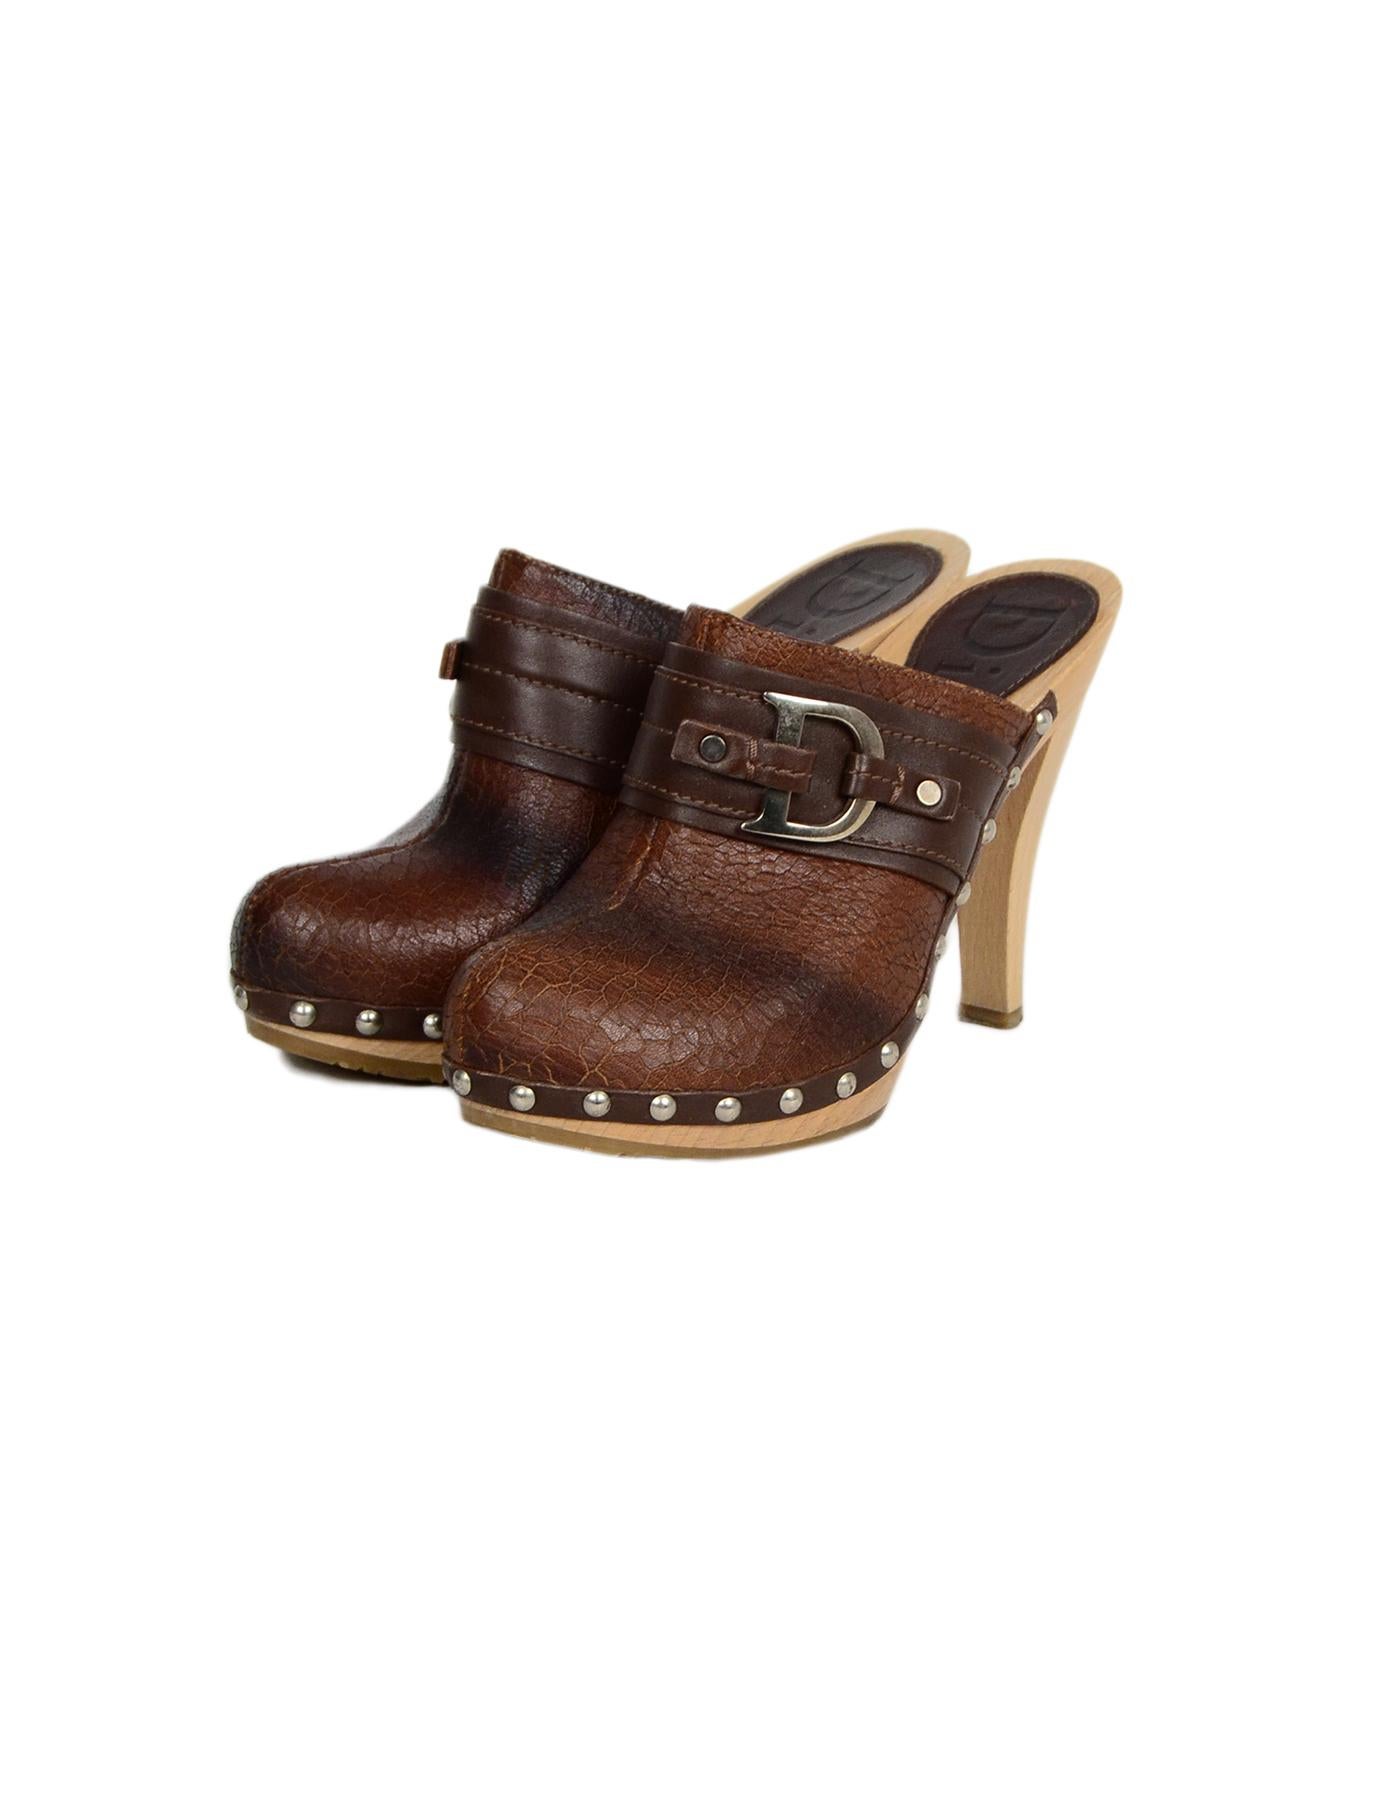 Christian Dior Brown Leather CD Clogs sz 37

Made In: Italy
Color: Brown
Hardware: Silvertone hardware
Materials: Leather
Closure/Opening: Slide on
Overall Condition: Very good pre-owned condition, with minor wear to leather, light scratches to